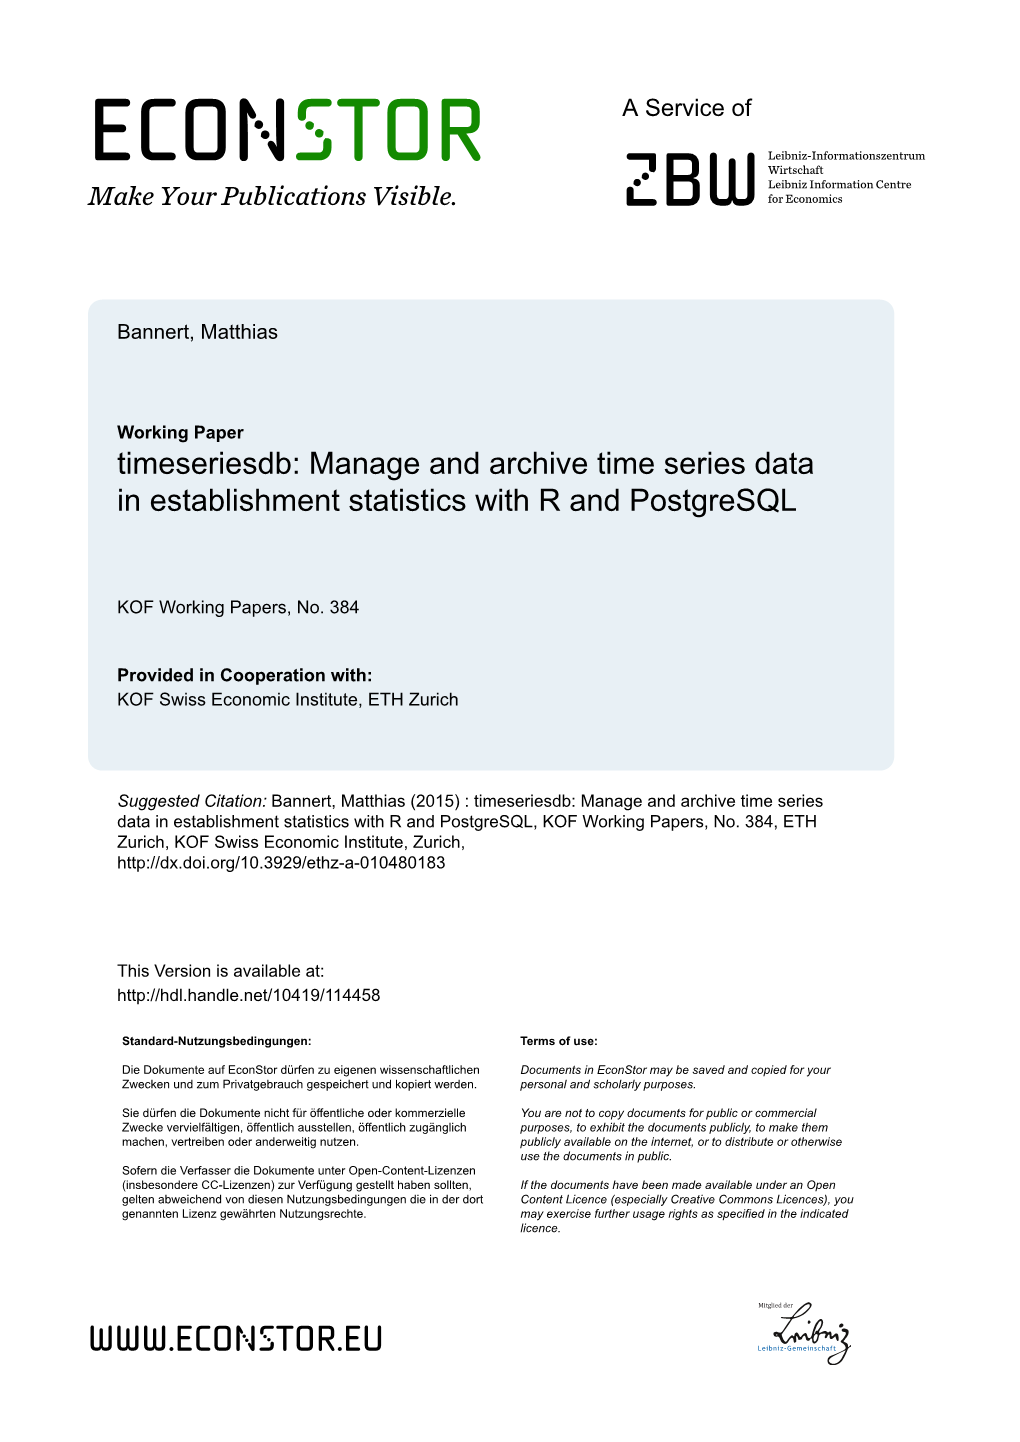 Timeseriesdb: Manage and Archive Time Series Data in Establishment Statistics with R and Postgresql